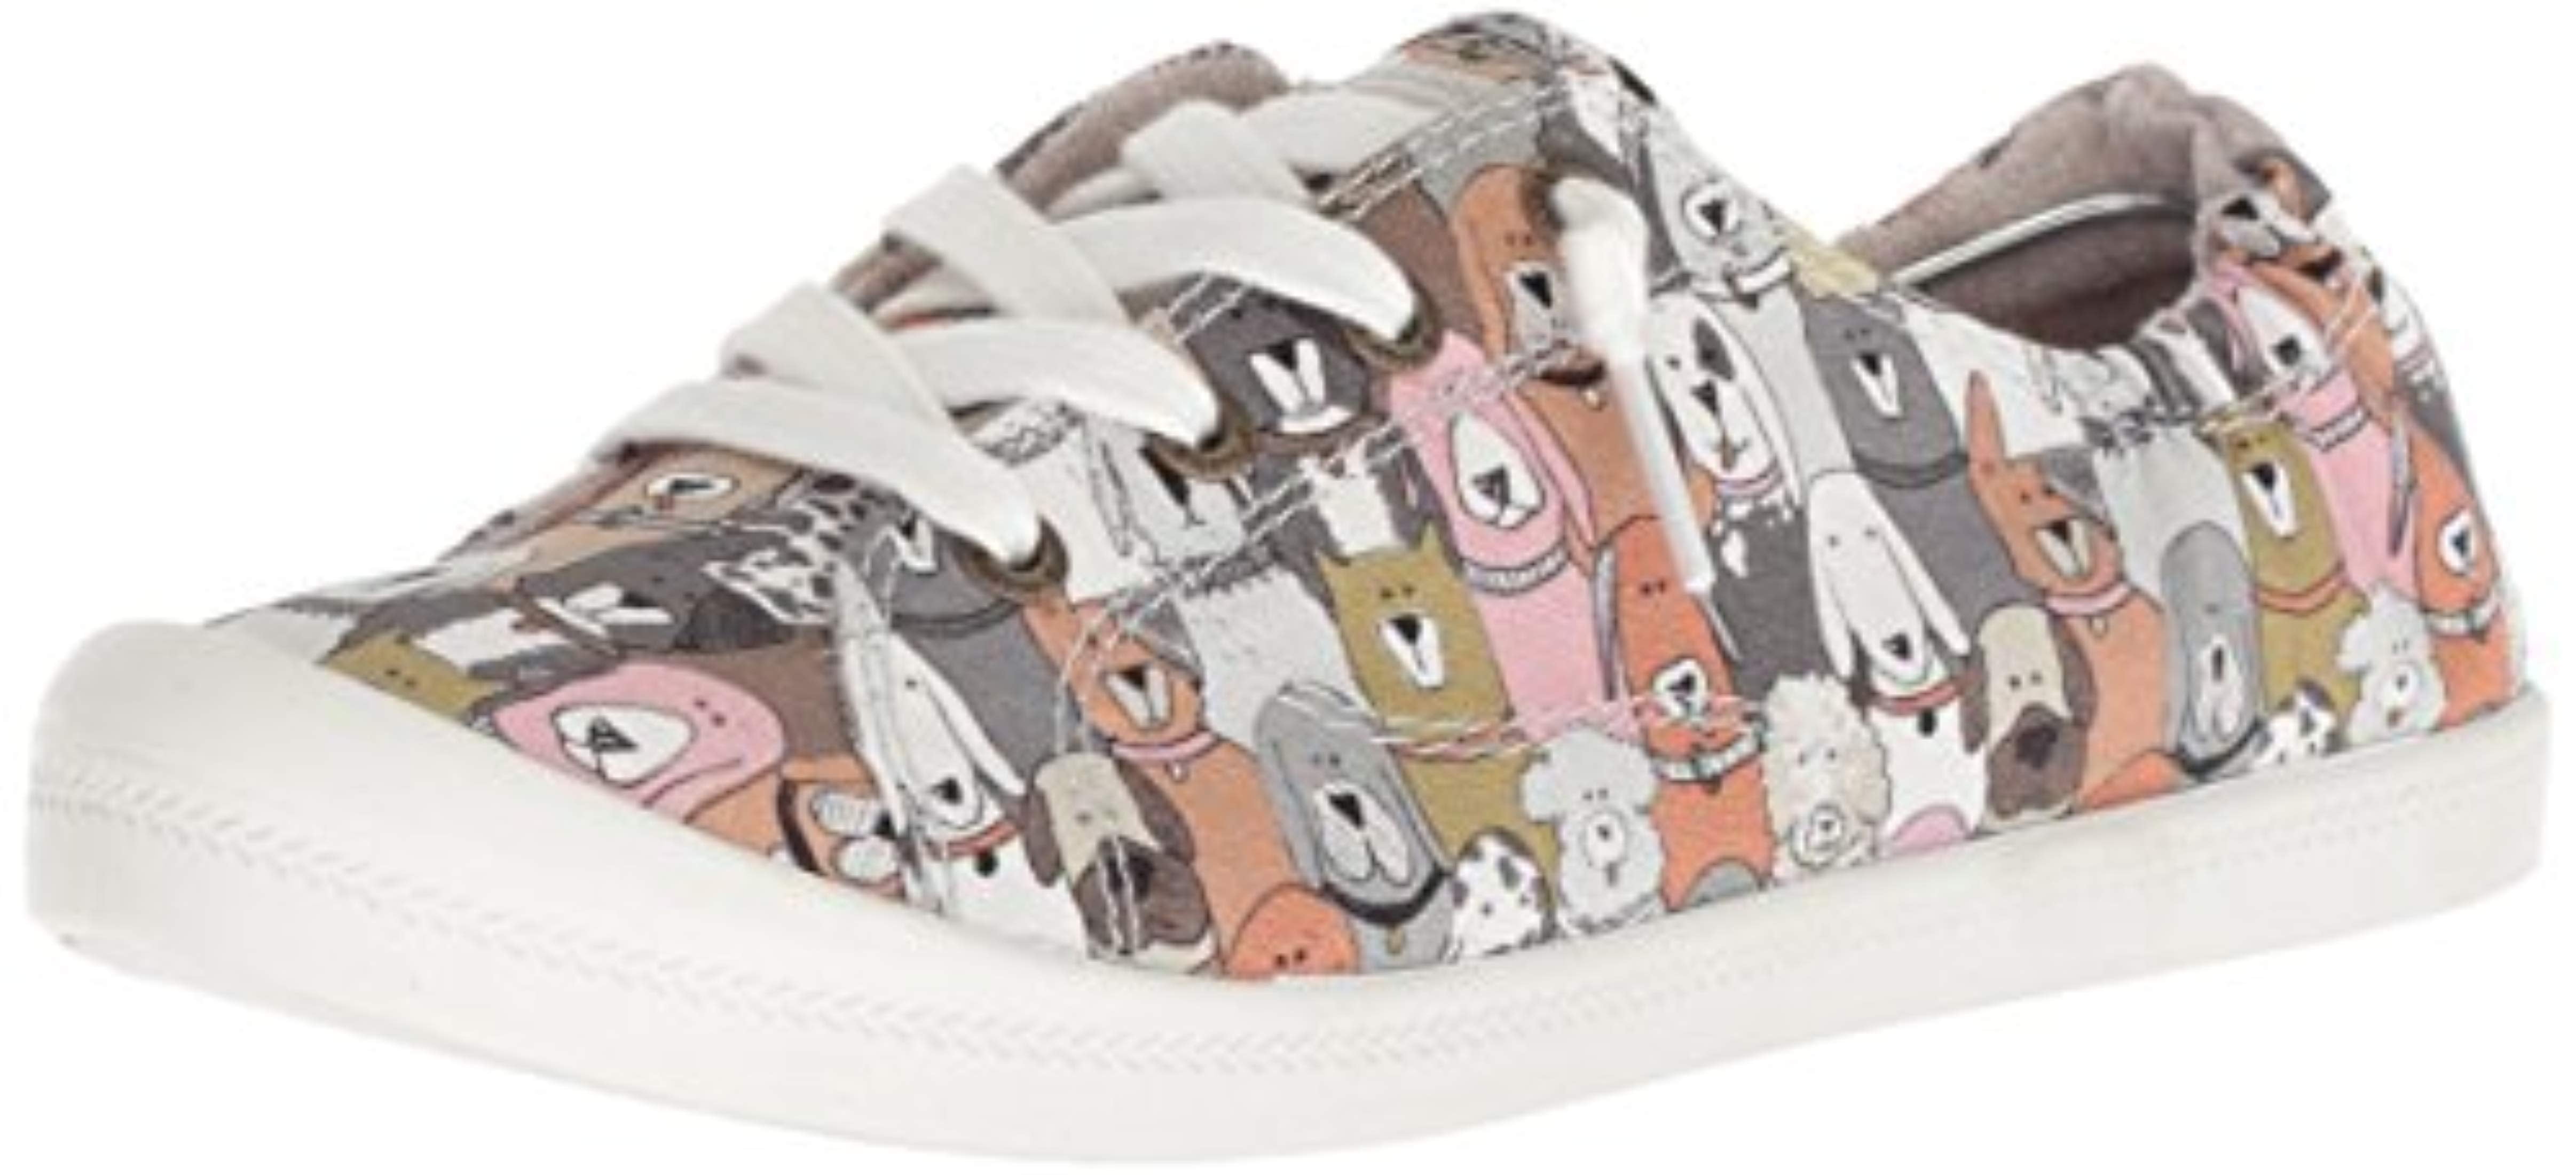 bobs dog house party shoes